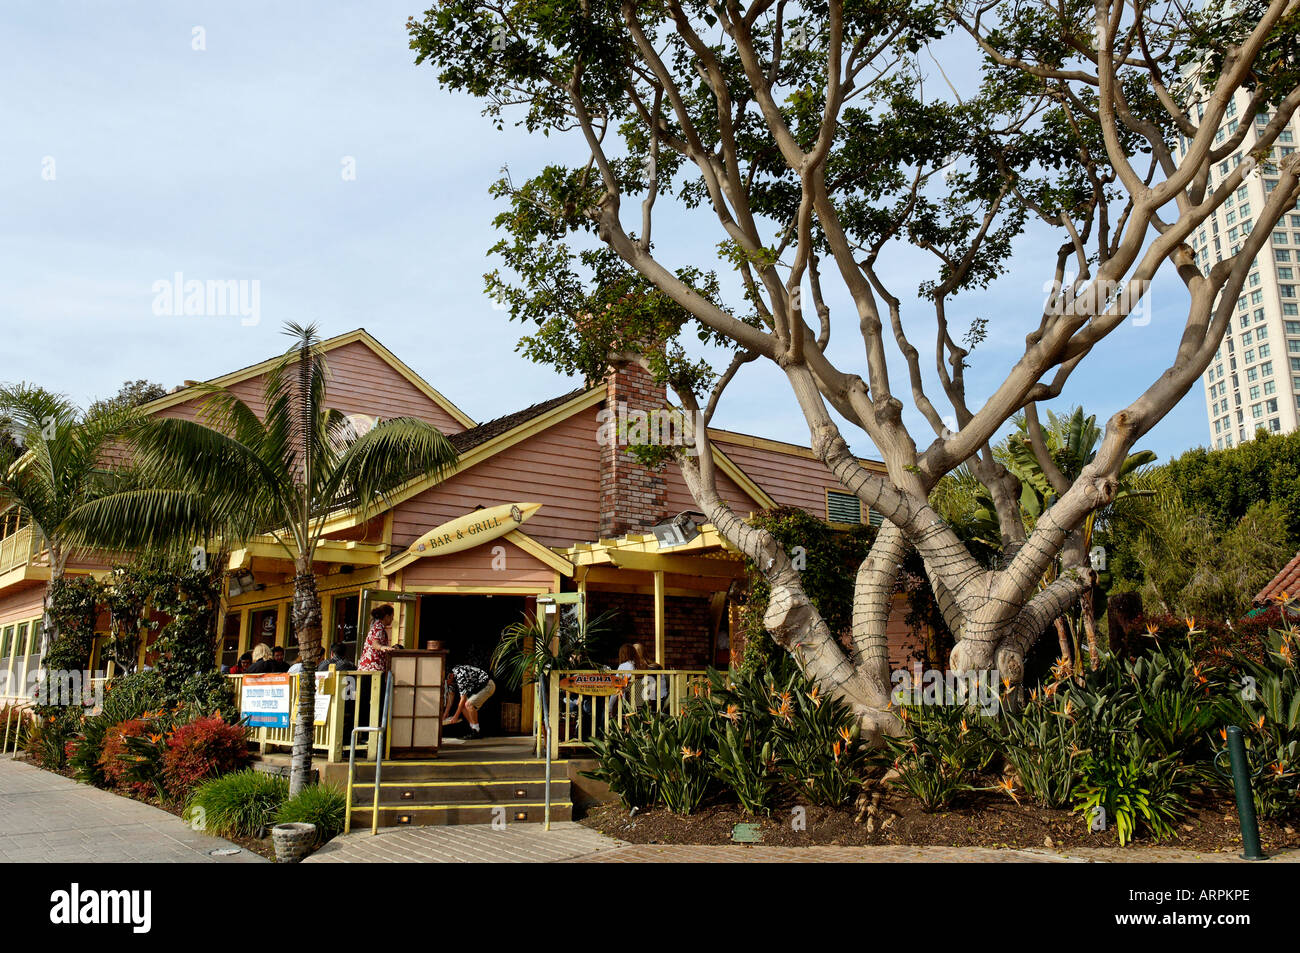 A Bar and Grill Restaurant Located at Seaport Village in San Diego, California Stock Photo